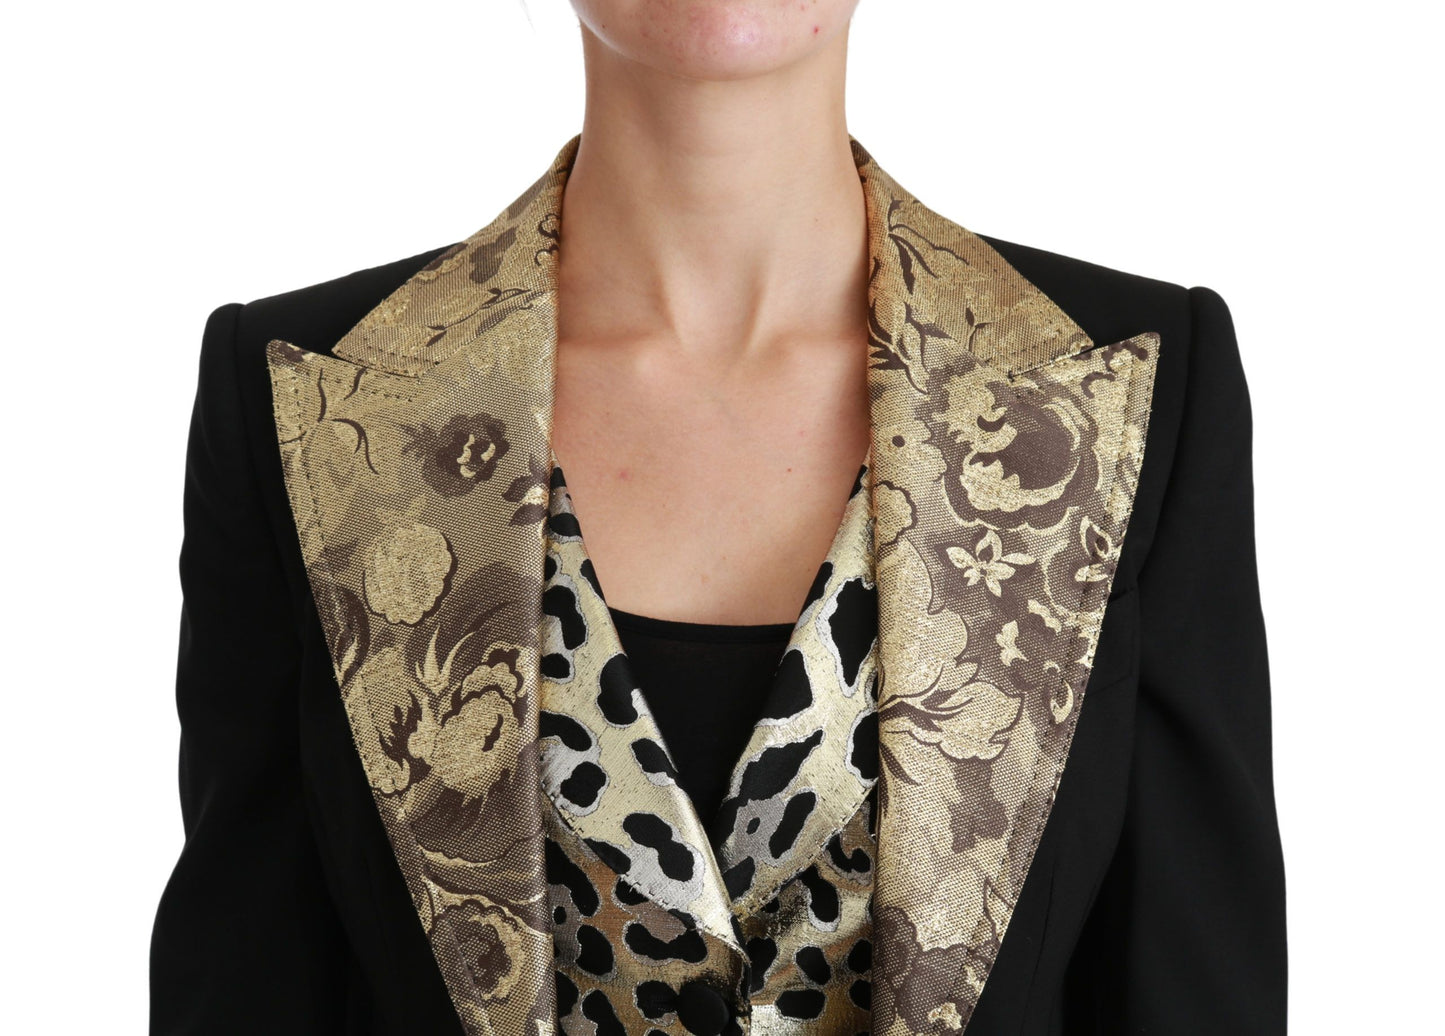 Dolce & Gabbana Ladies' Black Jacquard Vest Blazer Coat Wool Jacket - Designed by Dolce & Gabbana Available to Buy at a Discounted Price on Moon Behind The Hill Online Designer Discount Store